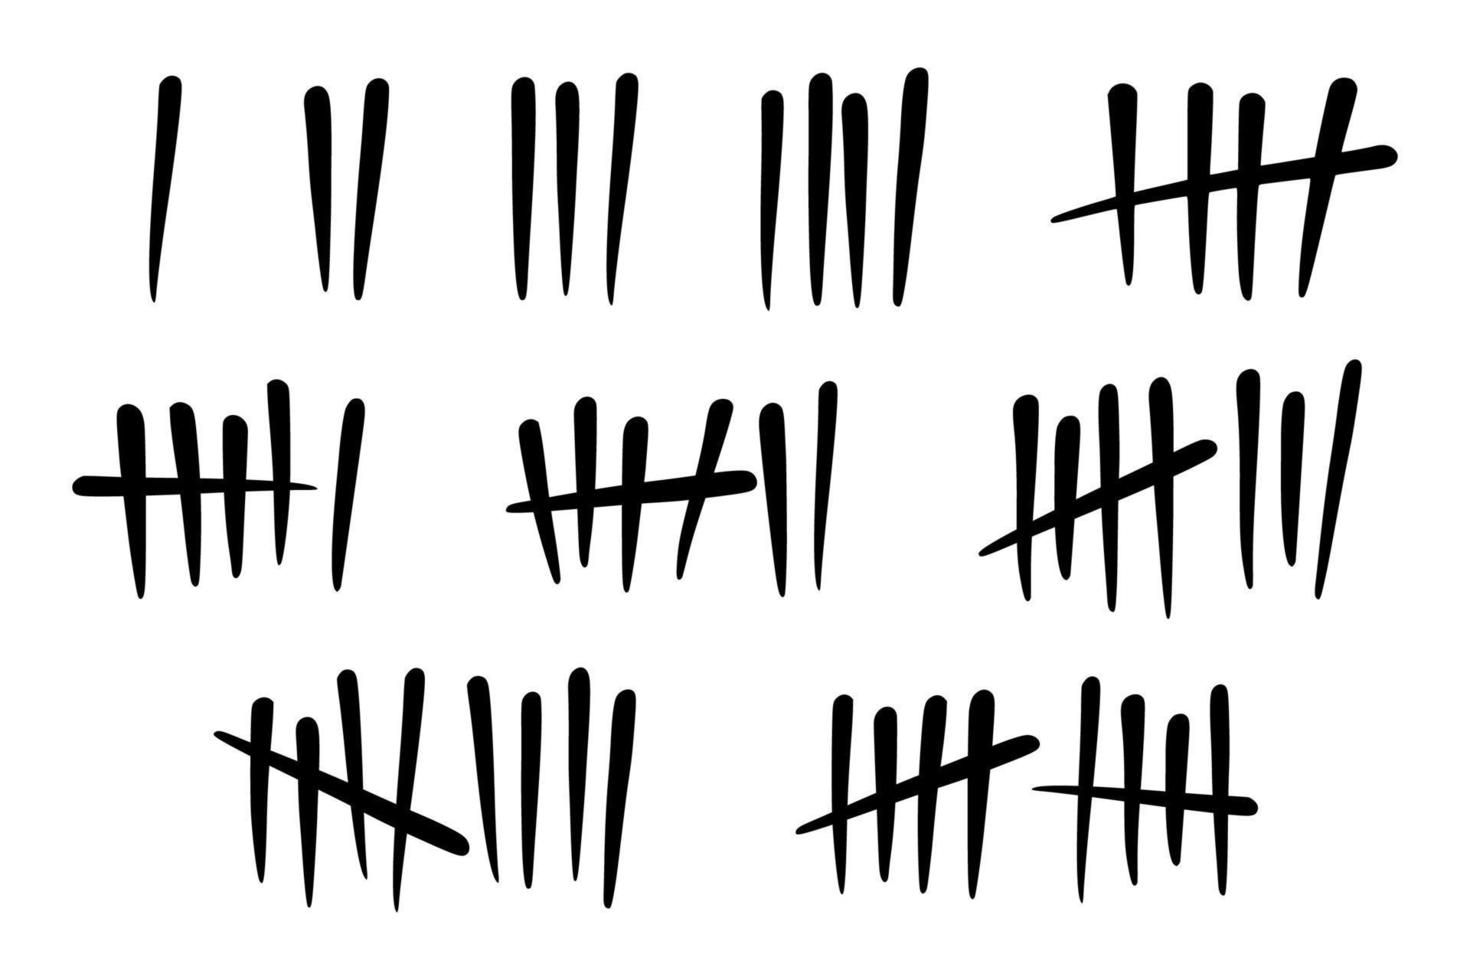 Tally marks to count days in prison. Tally marks for math lessons. Vector illustration